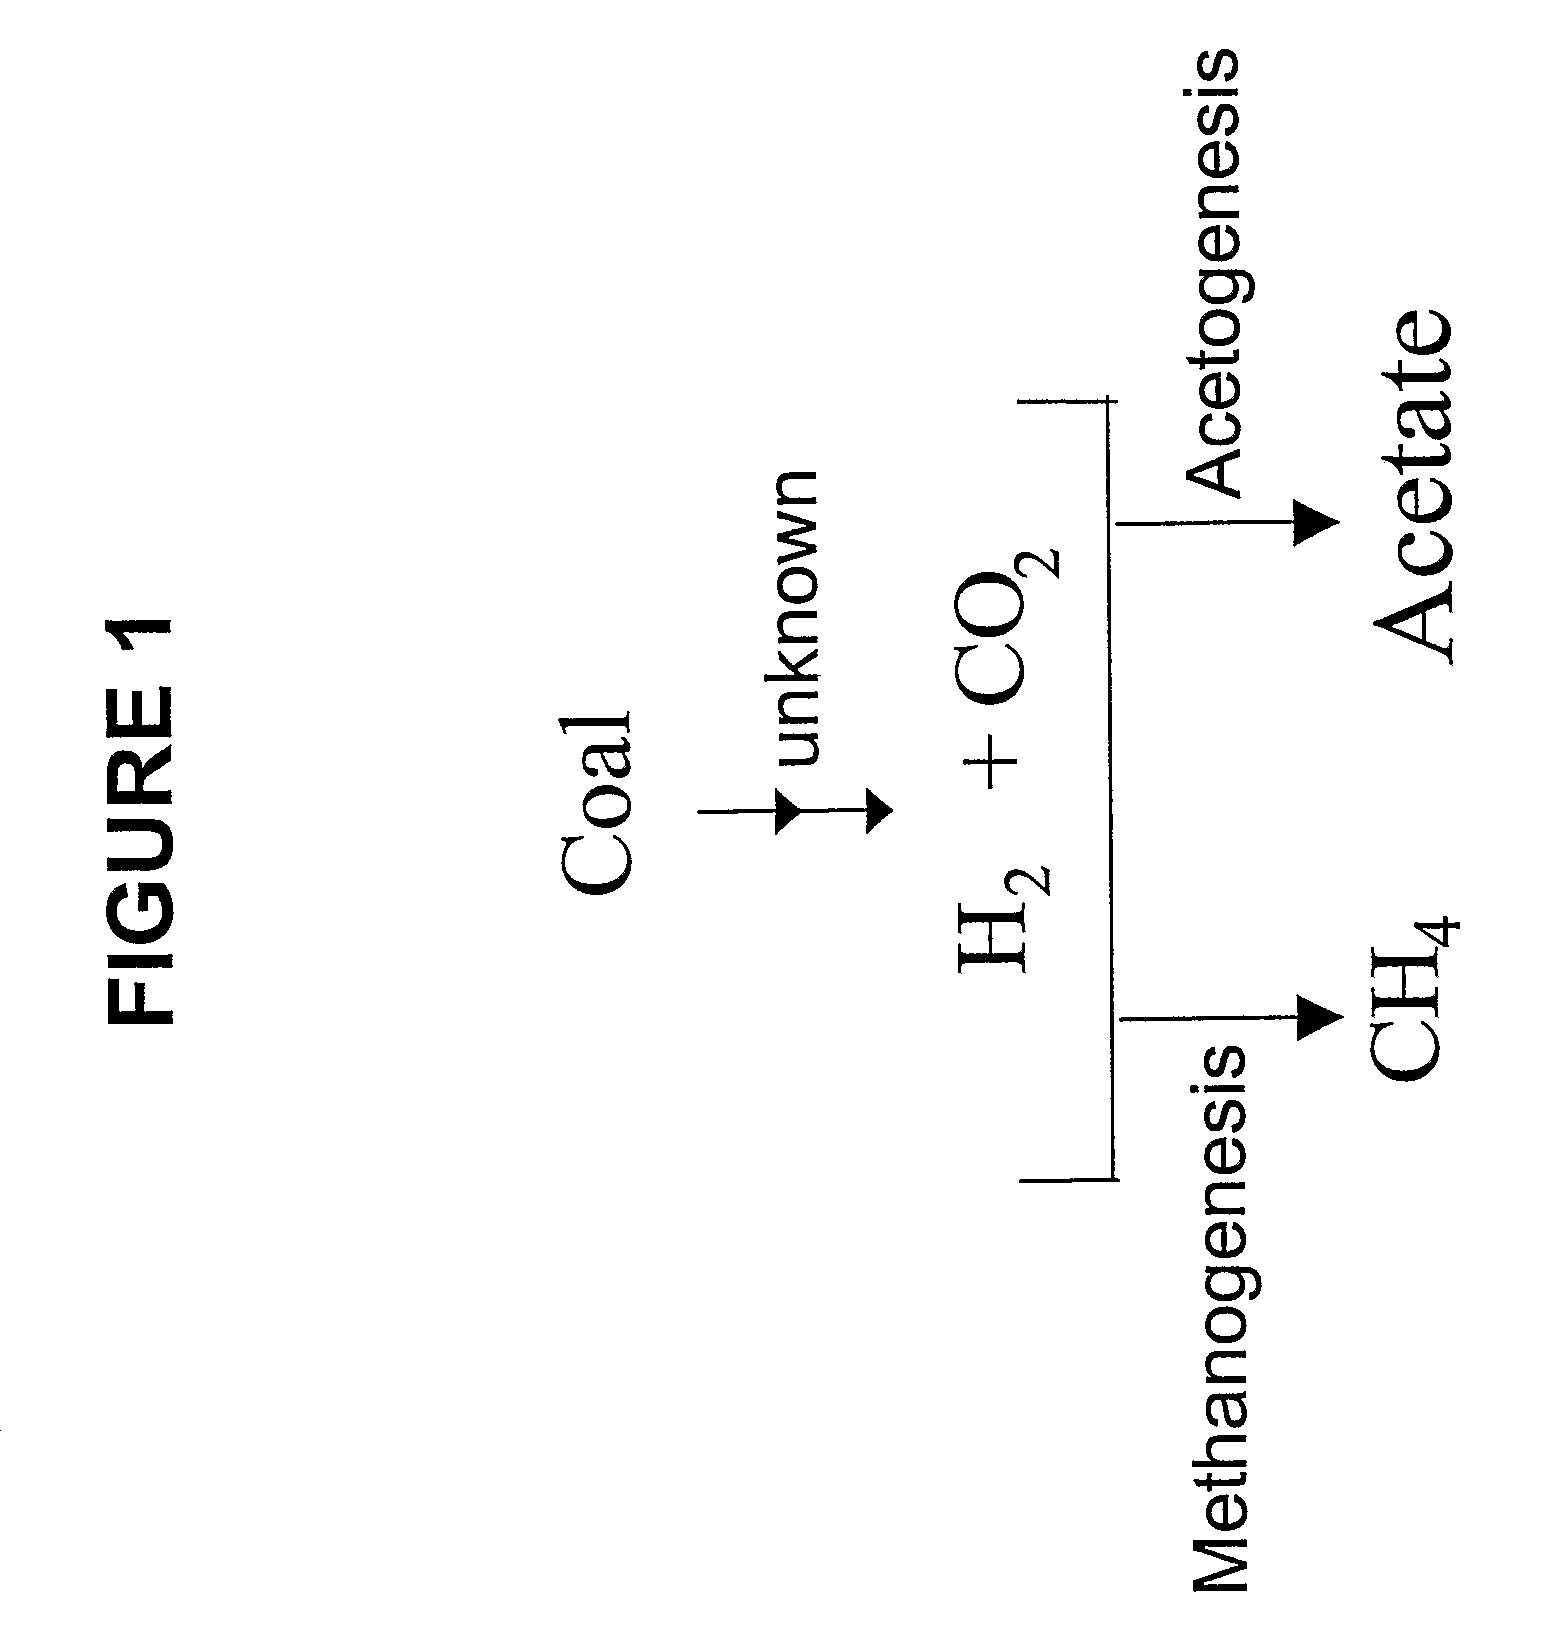 Generation of hydrogen from hydrocarbon bearing materials